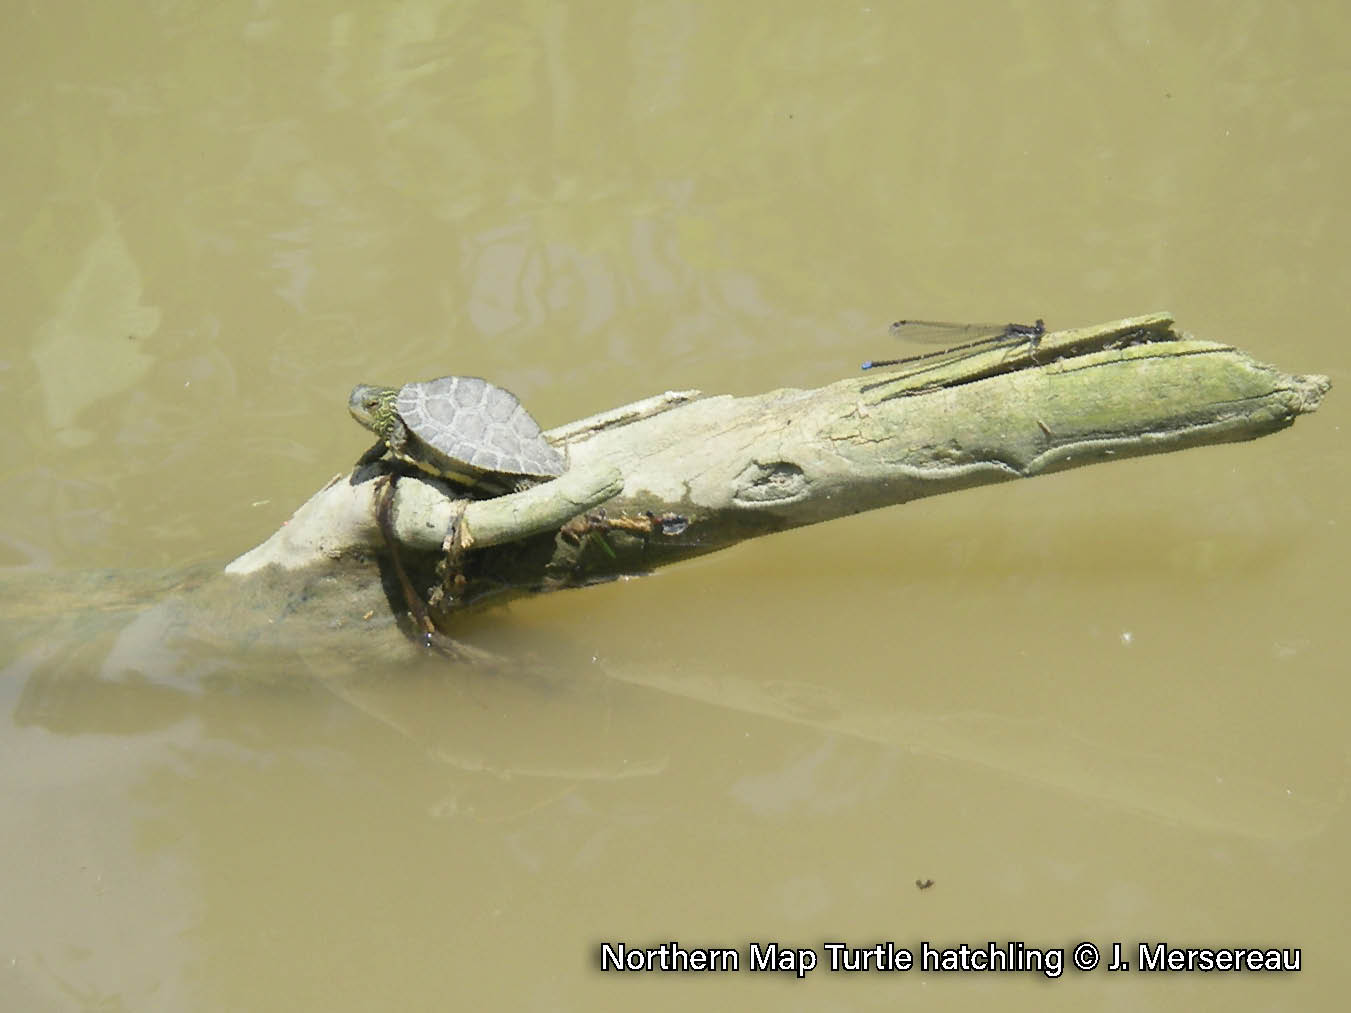 Picture of a Northern Map Turtle hatchling basking on a small log in a river with a damselfly. The turtle has a brown shell with a yellow contour line pattern, a ridge down the midline of its shell, and the back edge is serrated. It has yellow lines on its neck and a yellow spot behind its eye.